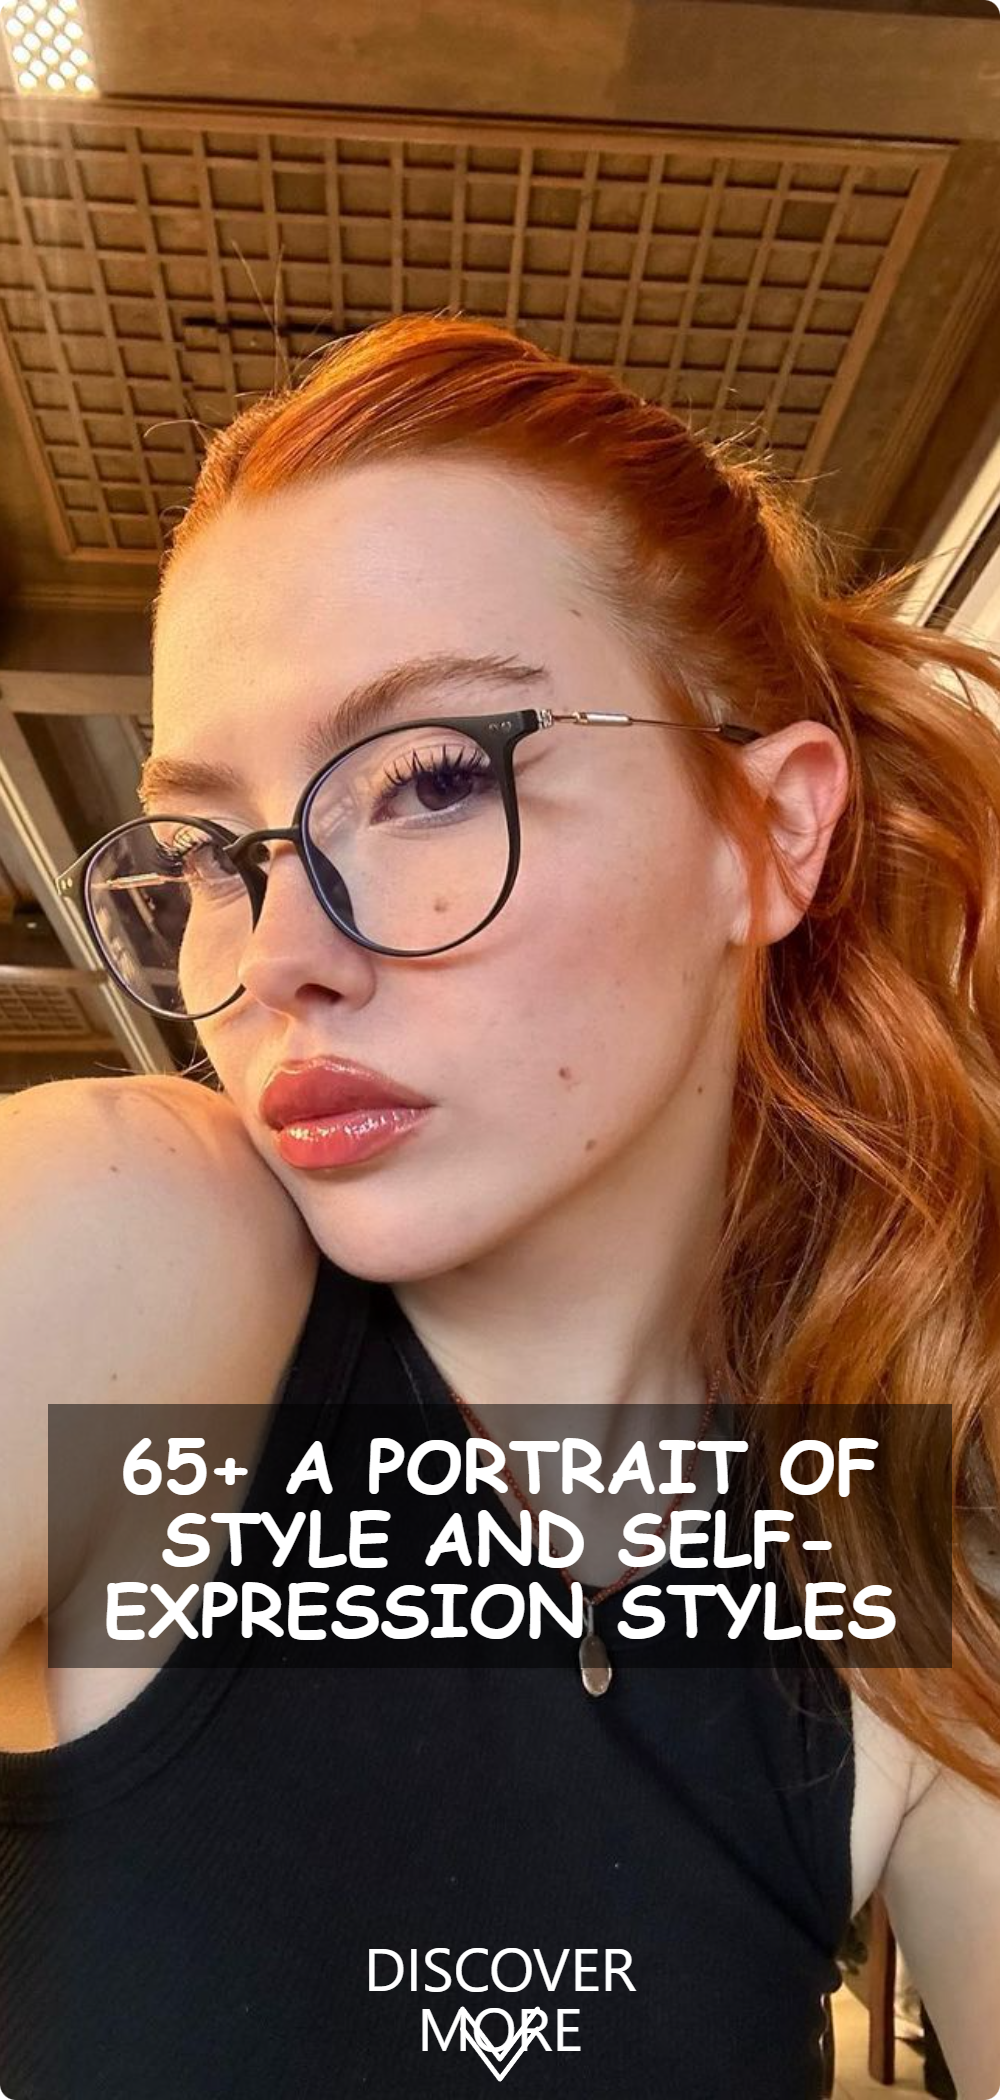 A woman sporting vibrant red hair, glasses, and a black top, exuding a confident and artistic vibe.